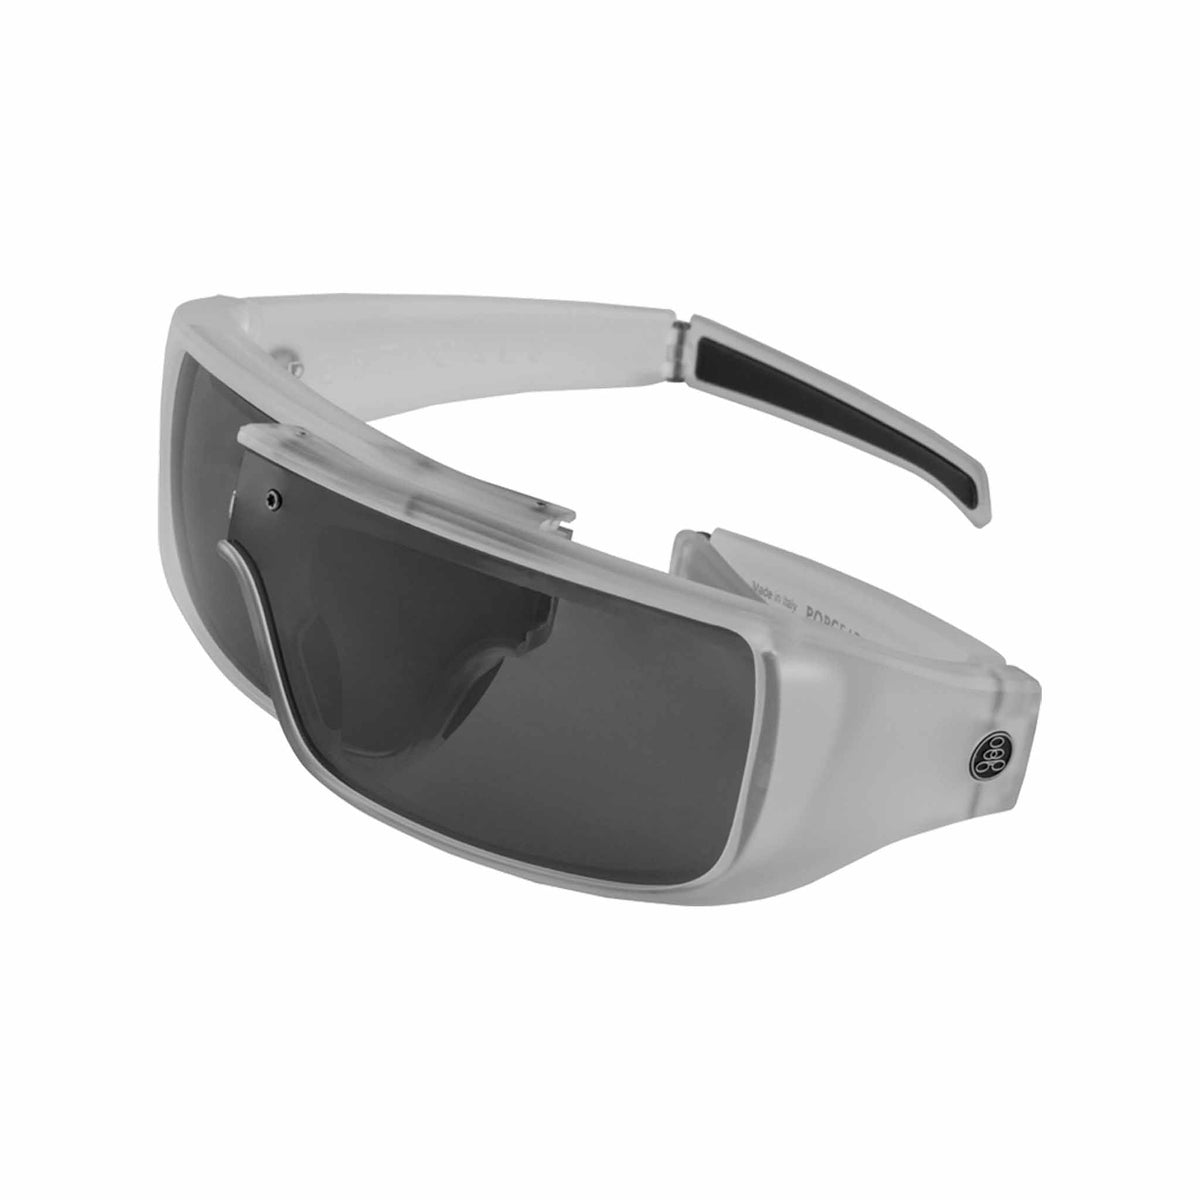 Popticals, Premium Compact Sunglasses, PopGear, 010050-XYOO, Polarized Sunglasses, Matte Crystal Frame, Gray Lenses, Spider View